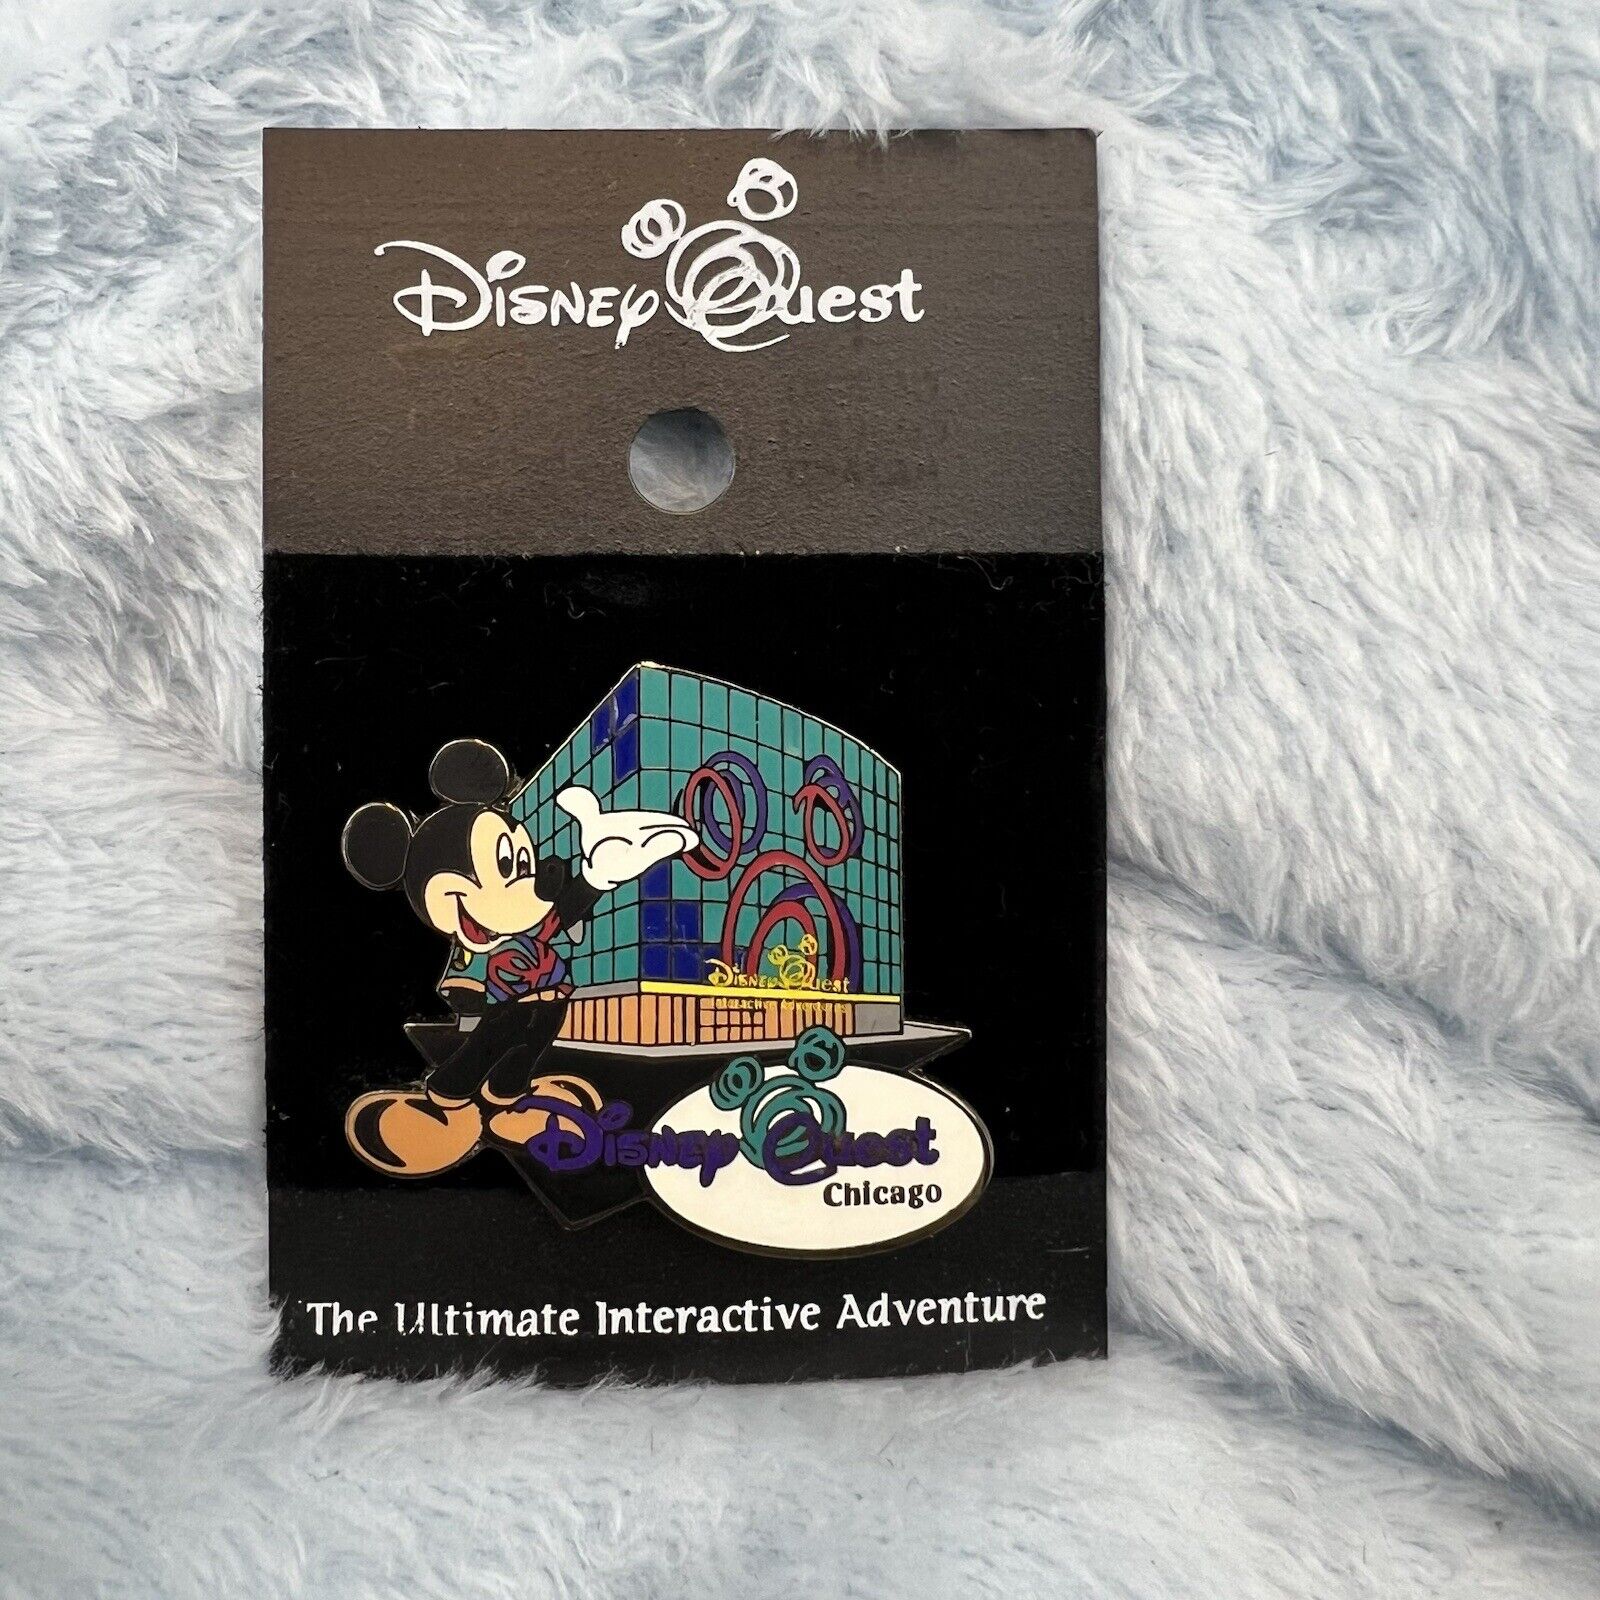 Disney Pin 2001 Disney Quest Building Mickey Mouse Chicago Ultimate Interactive